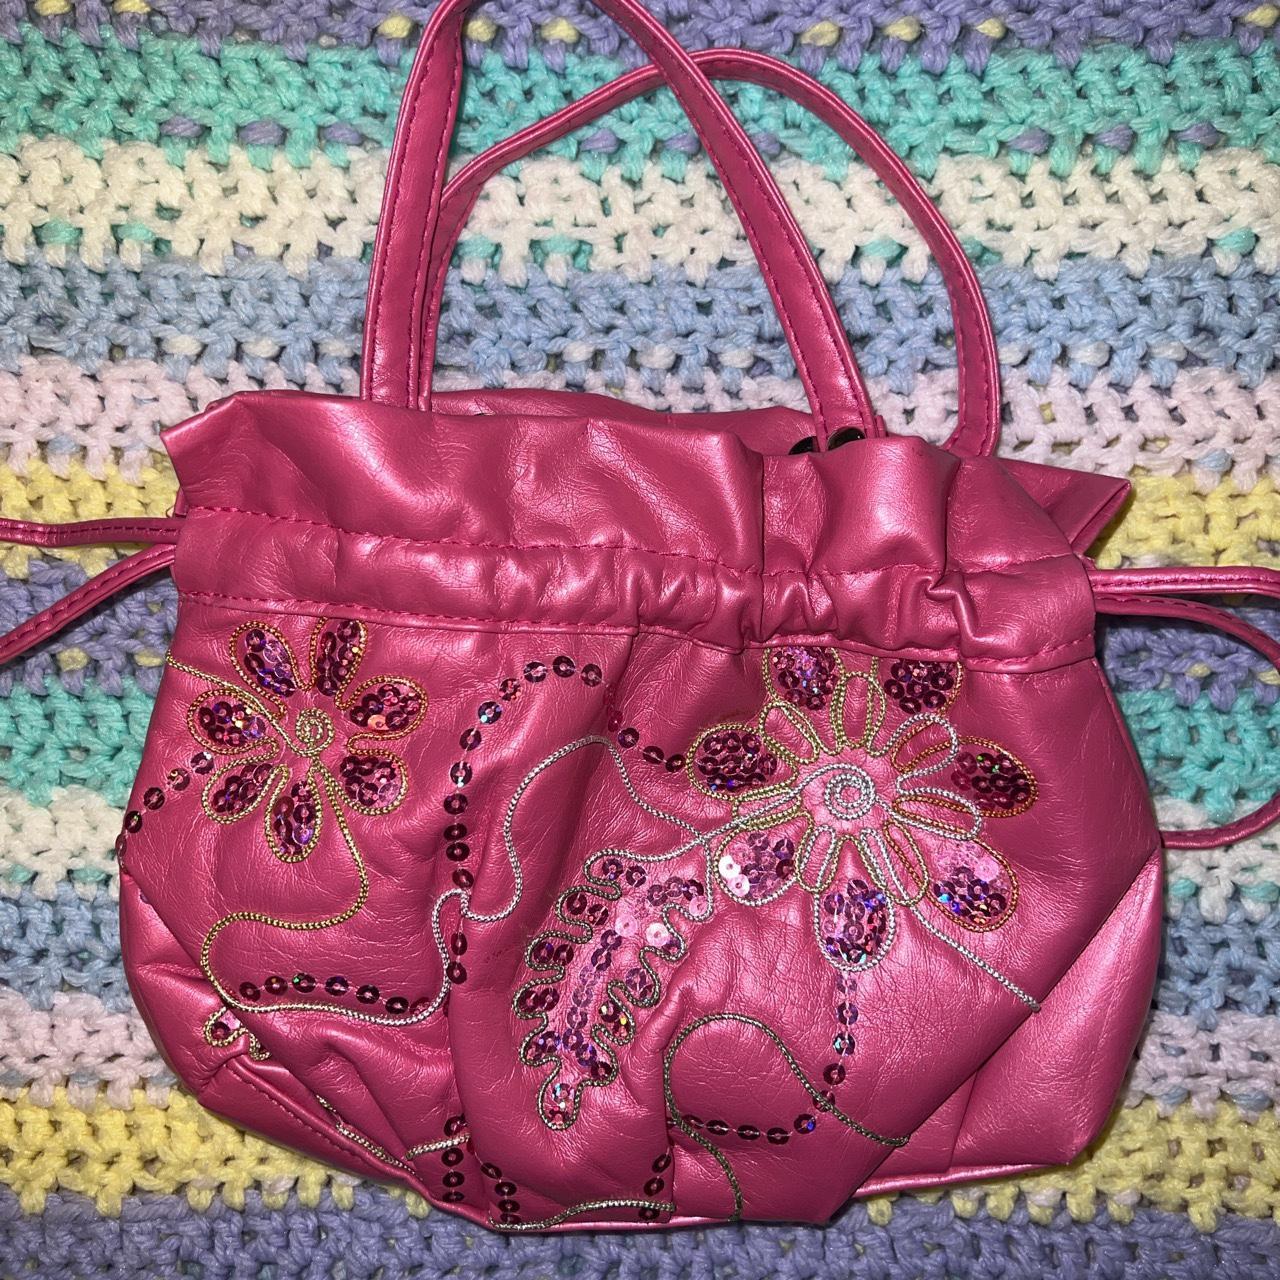 DO NOT BUY ‼️ looking for BRATZ MONOGRAM PURSE any - Depop